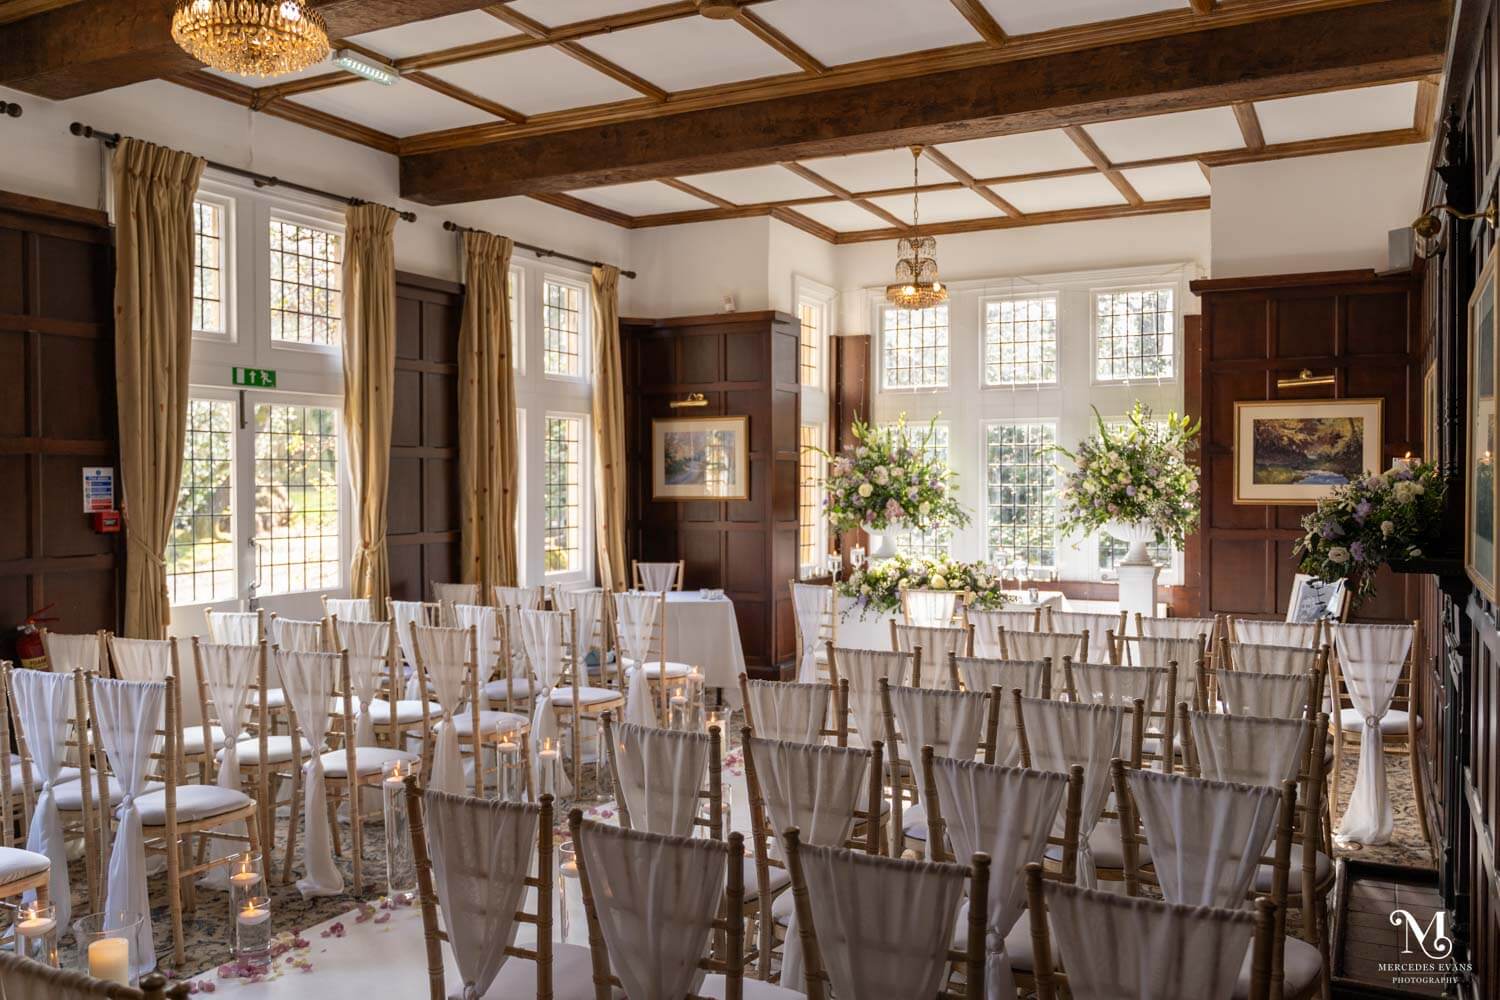 the Oak Room at cantley house set up for a wedding ceremony with huge flower pedestals and chiavari chairs